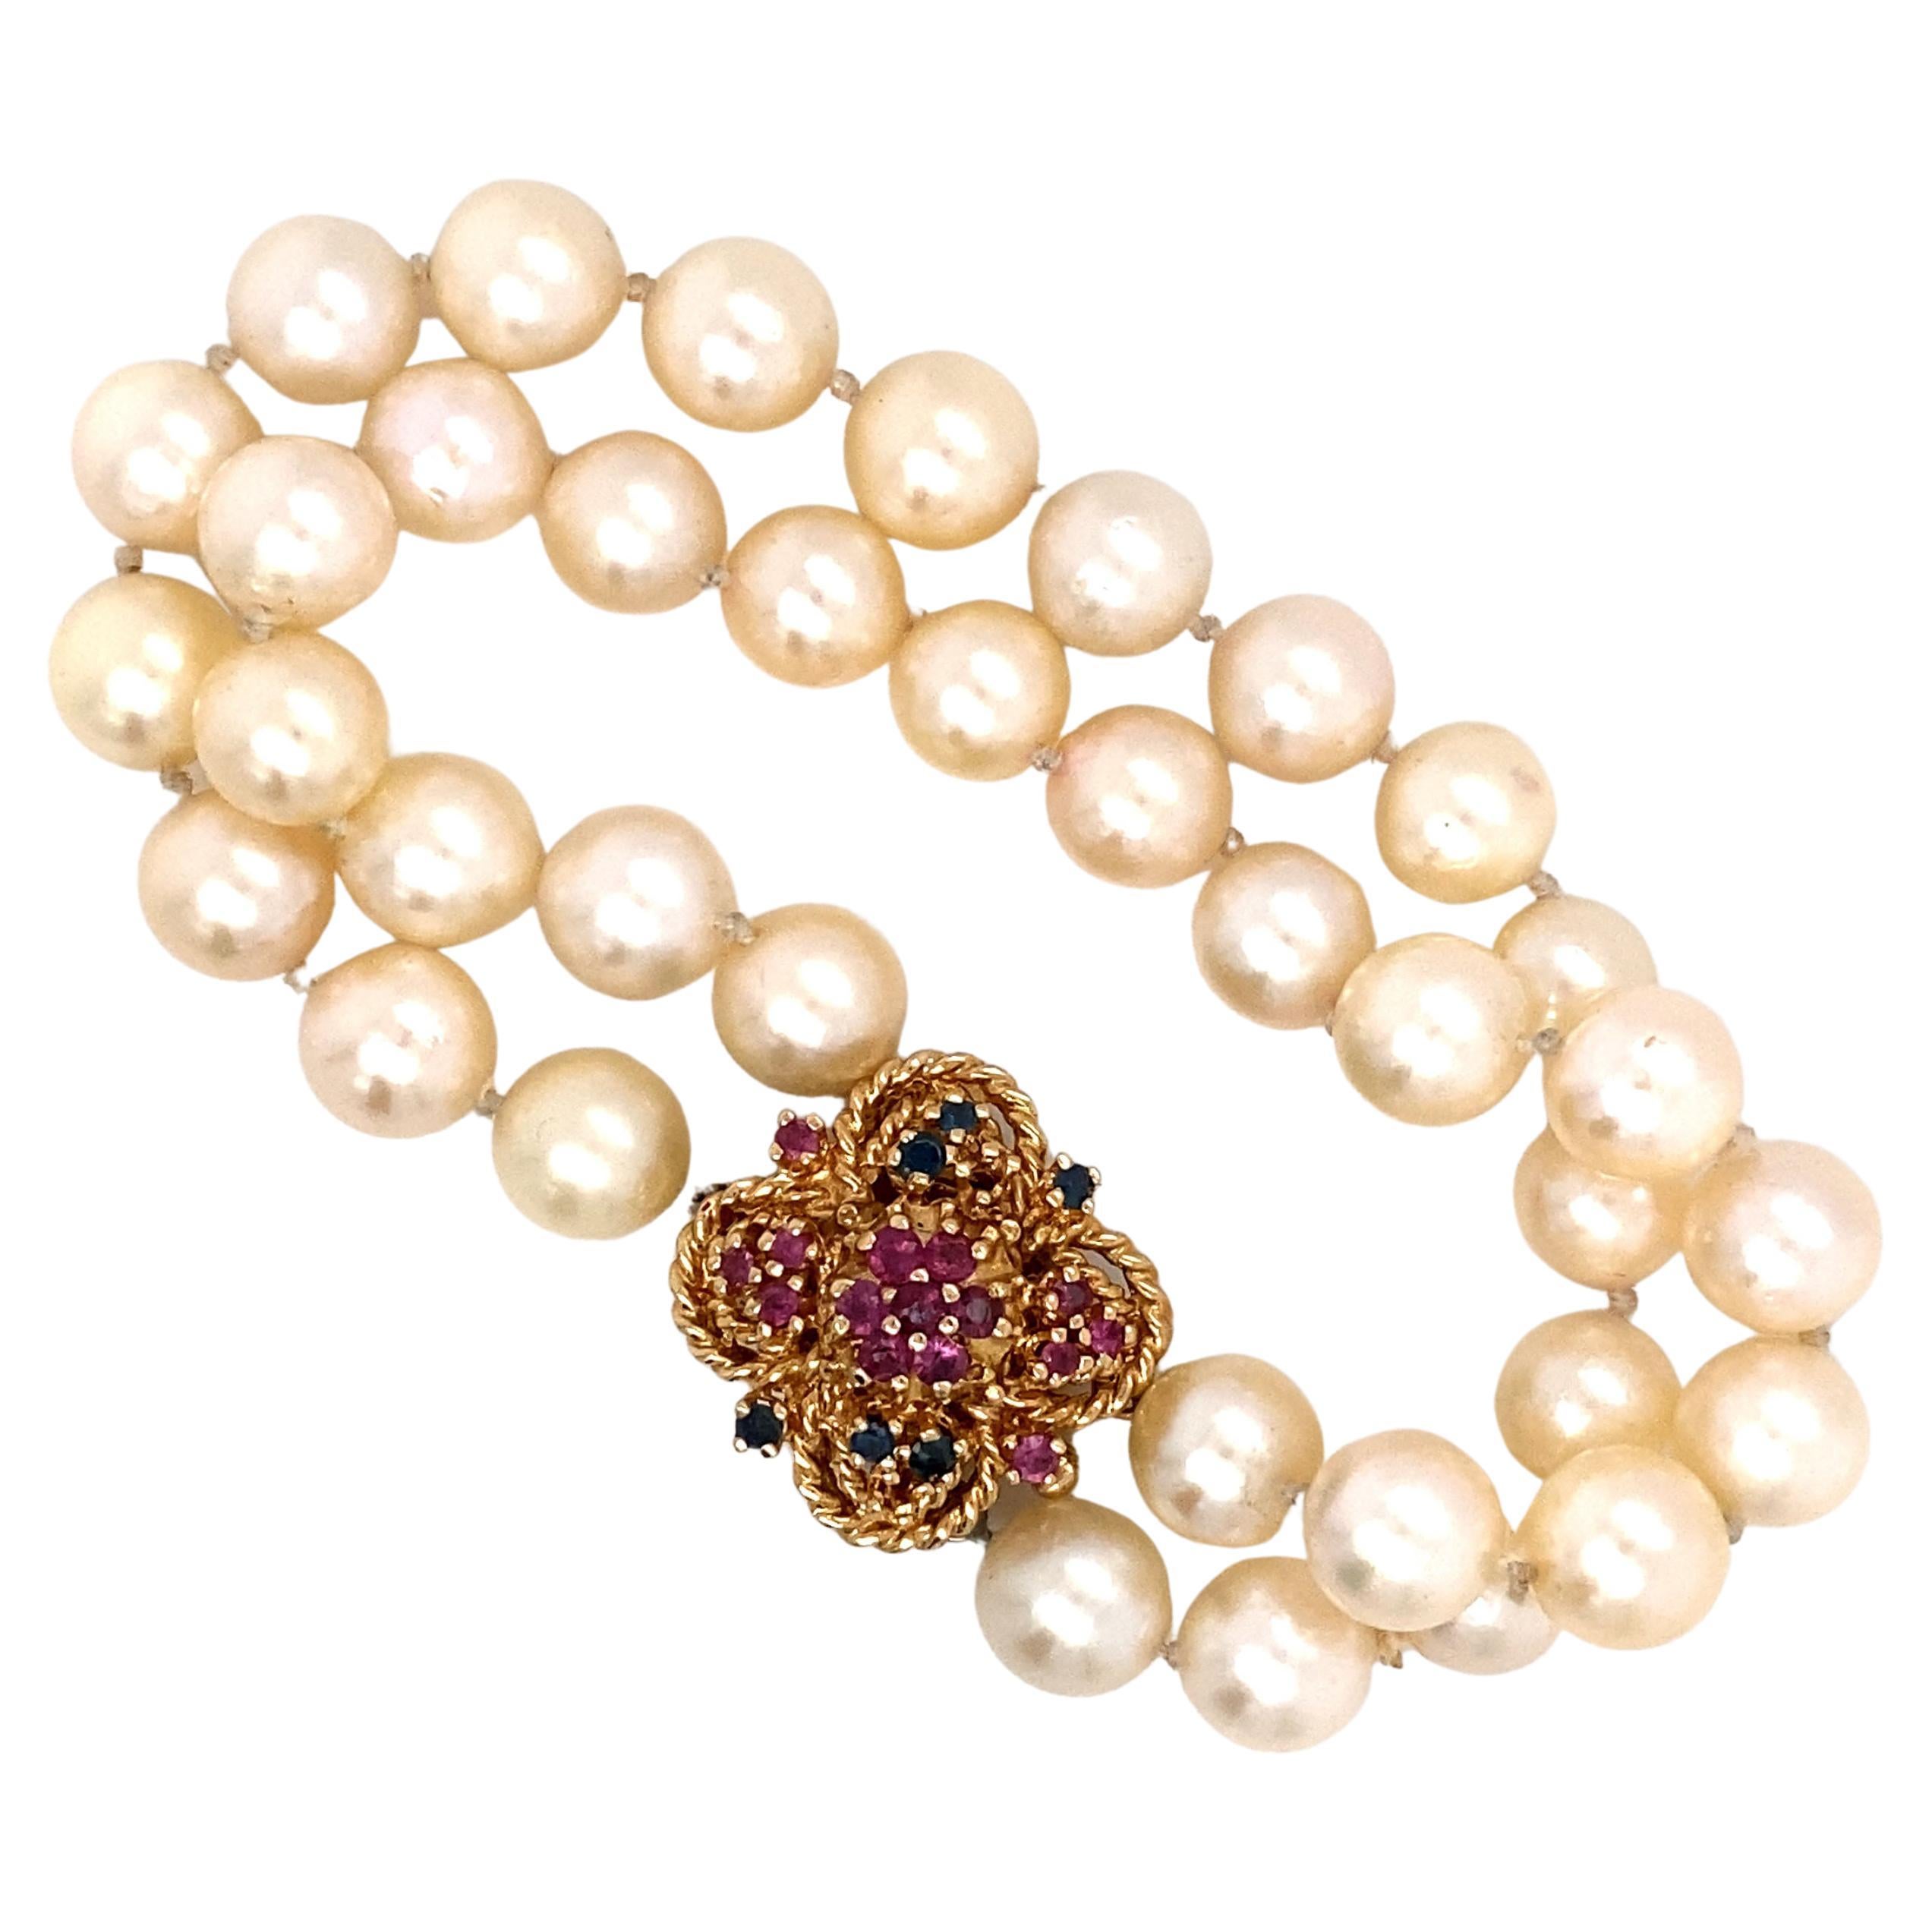 Cultured Pearl Bracelet with Magnetic Ball Clasp | The Perfect Setting, Inc